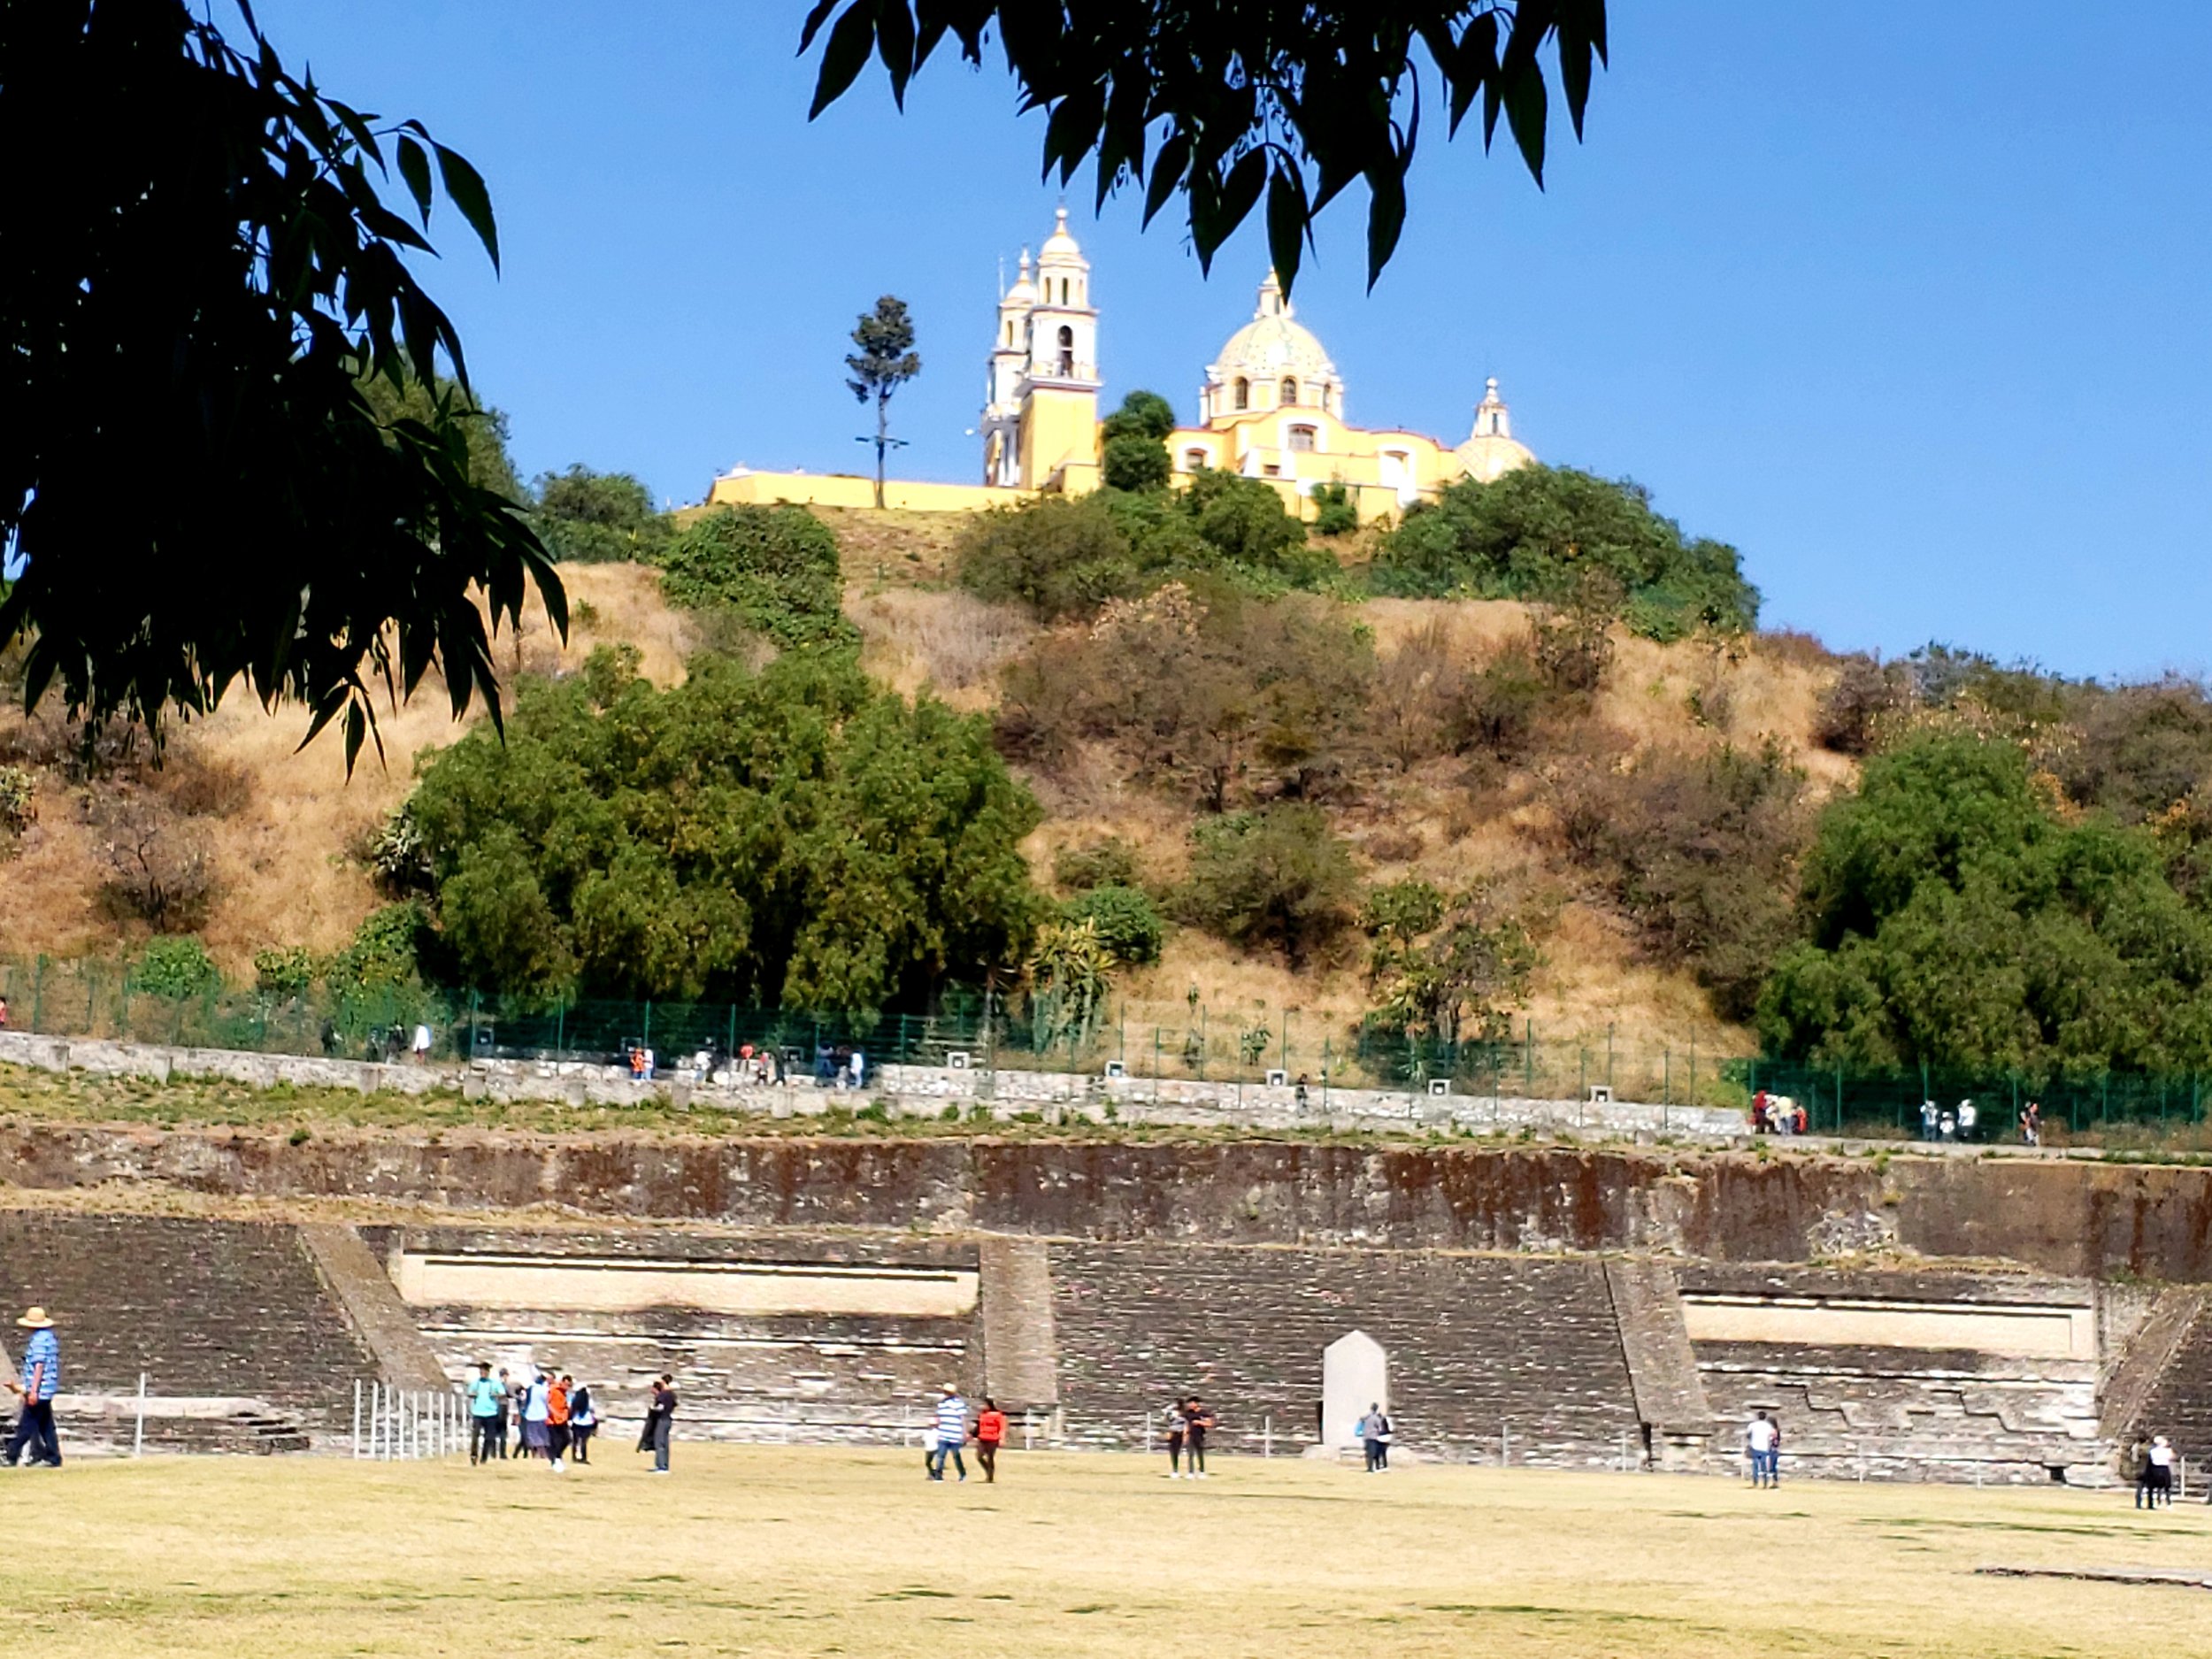 Church built on the top of the pyramid in Cholula